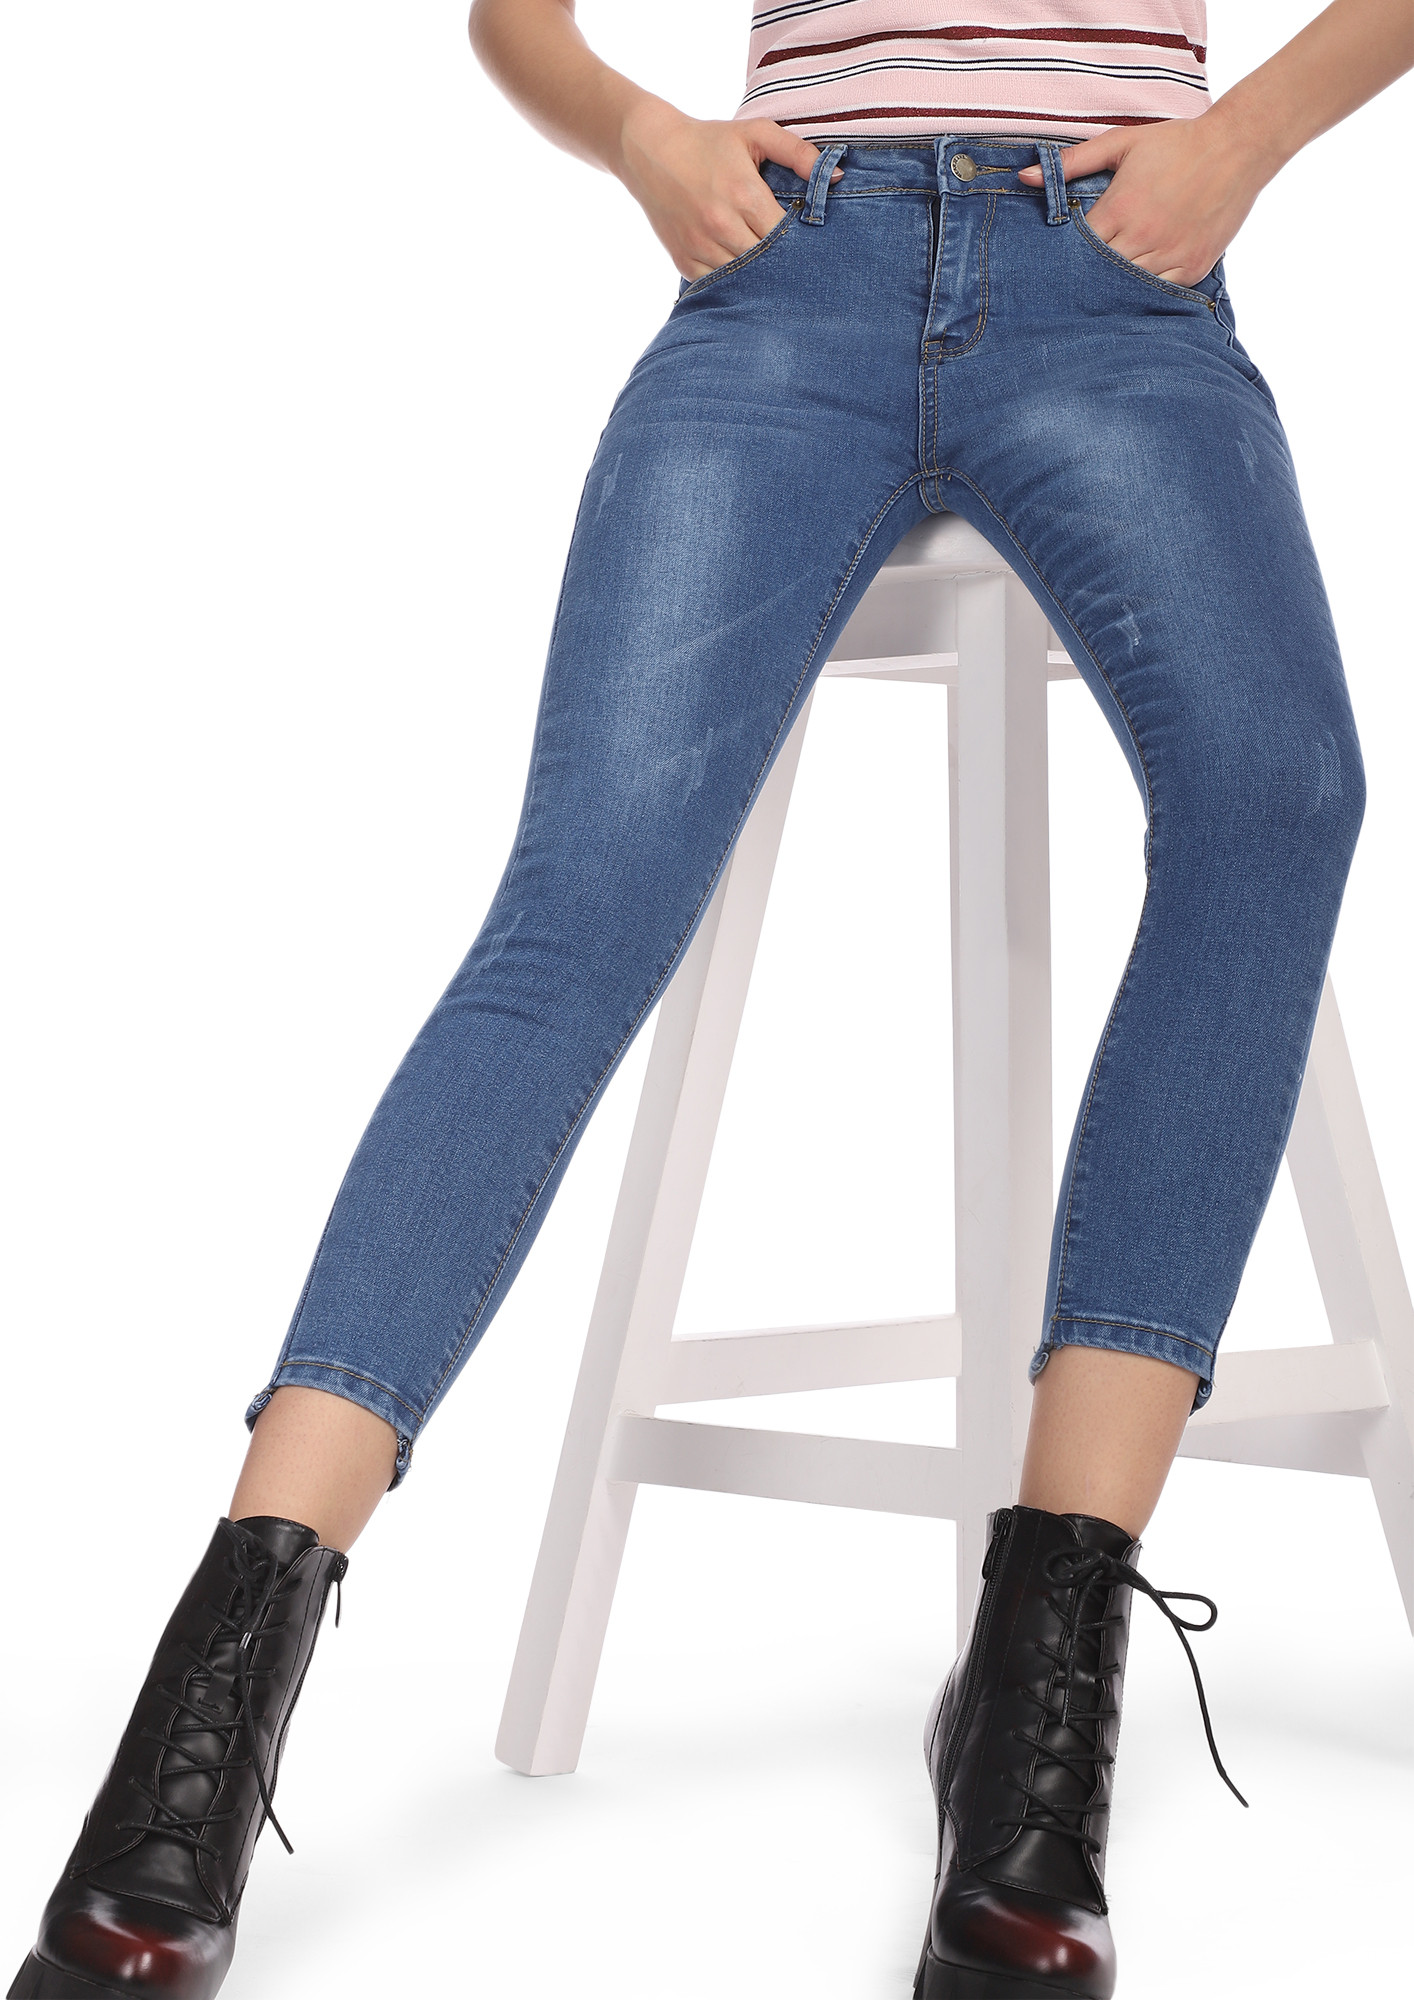 STEPPING STONES LIGHT BLUE CROPPED JEANS